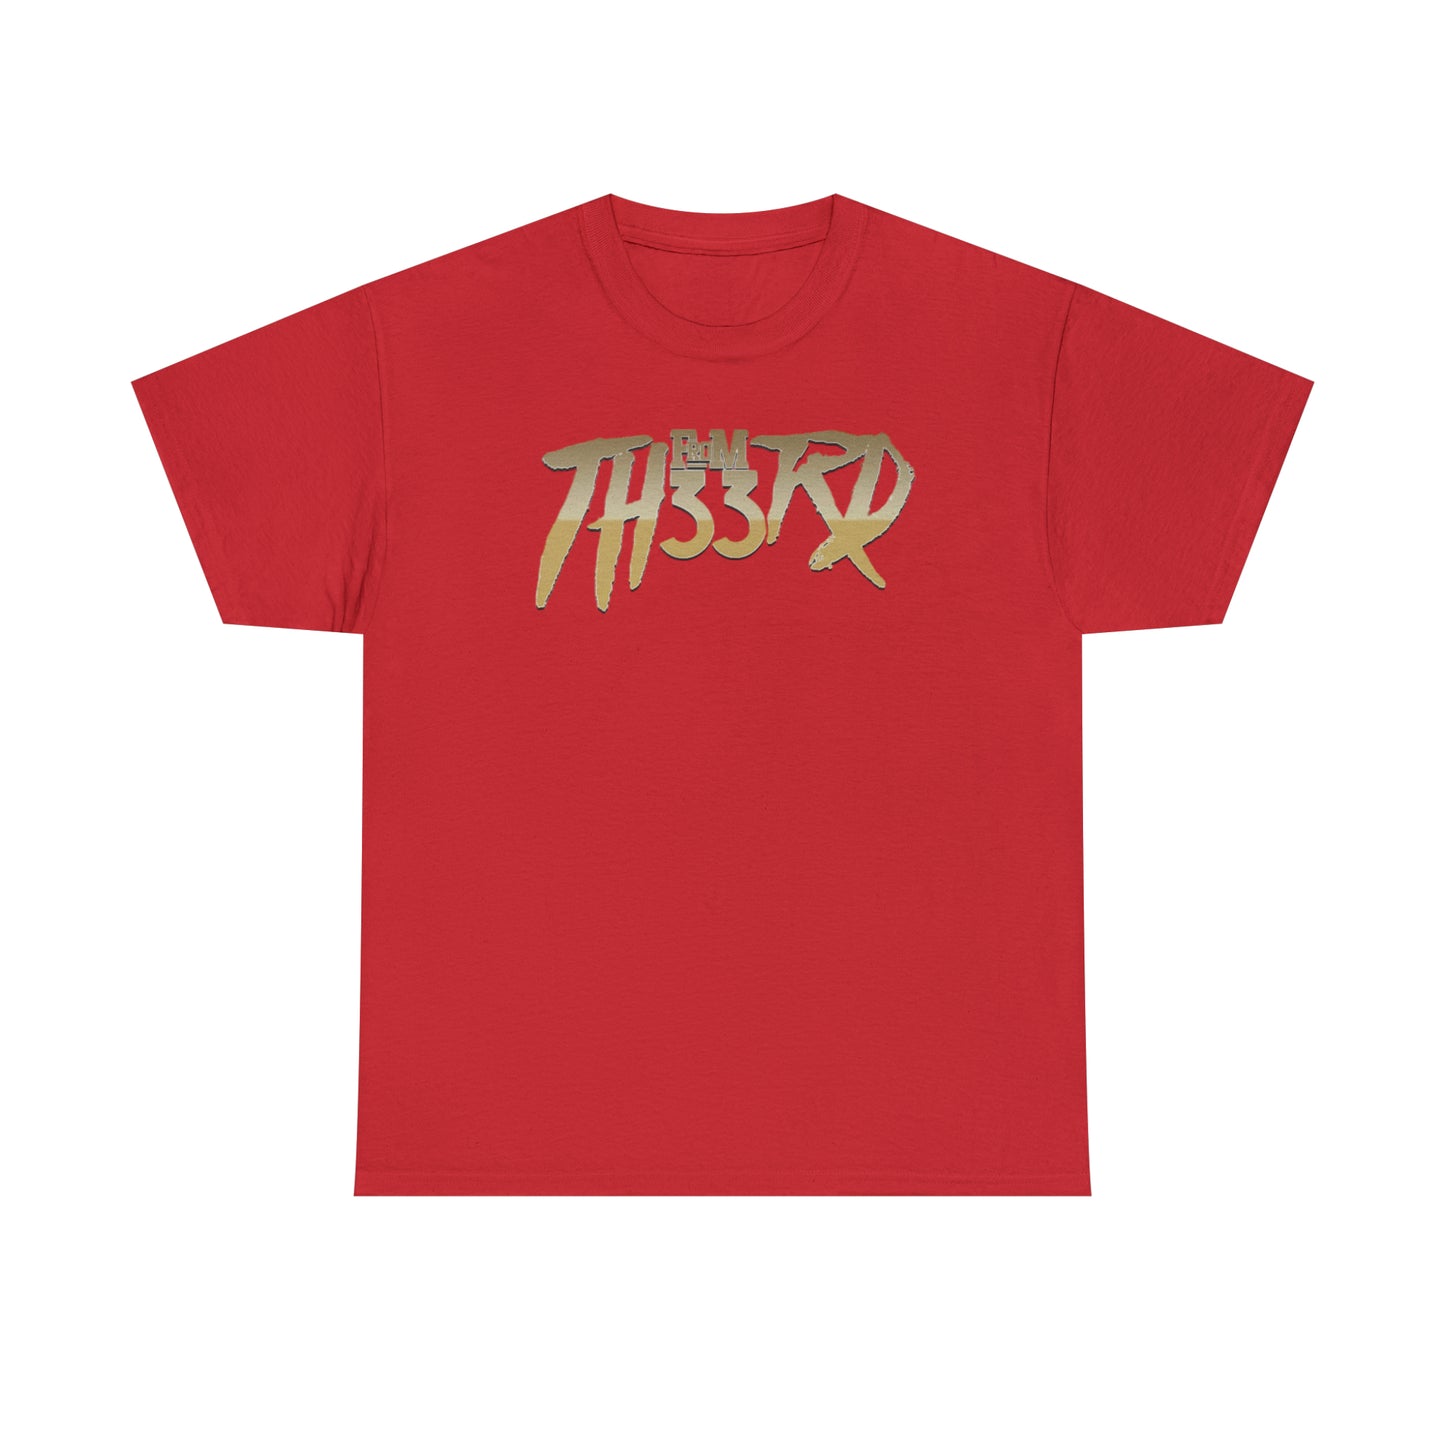 Fromth33rd Heavy cotton Tee